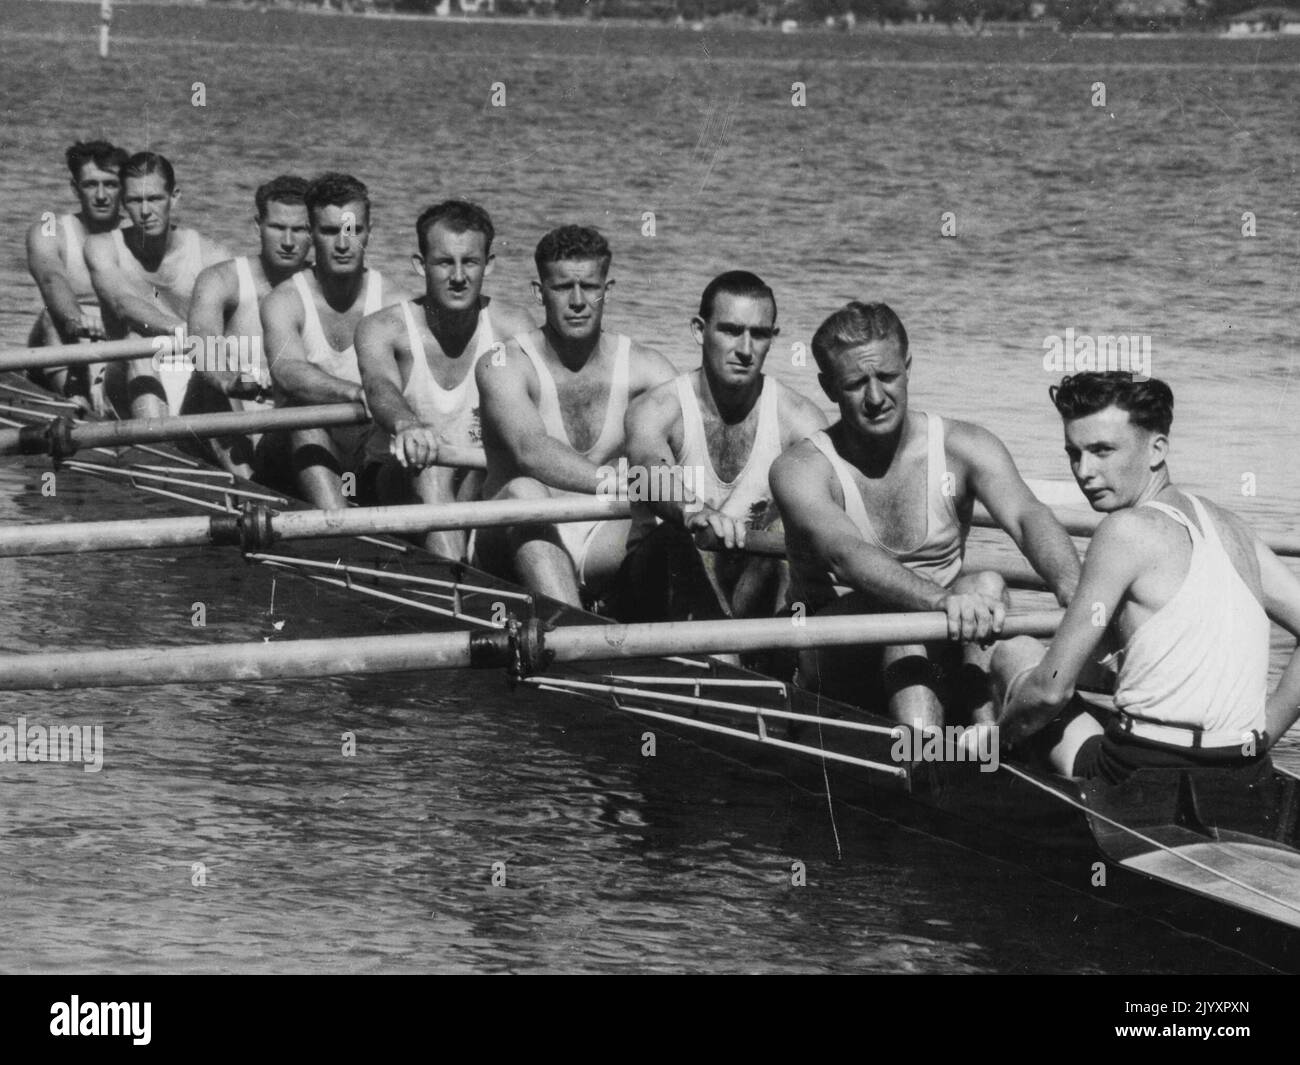 N.S.W. King's Cup Crew In Perth -- L. Robinson (stroke), O.A. Ruffels, P. Webb, B.H. Goswell, C.A. Cogle, G. Montgomerie, D. Bartley, A. Brown (bow), E.B. Healy (cox). May 21, 1947. Stock Photo